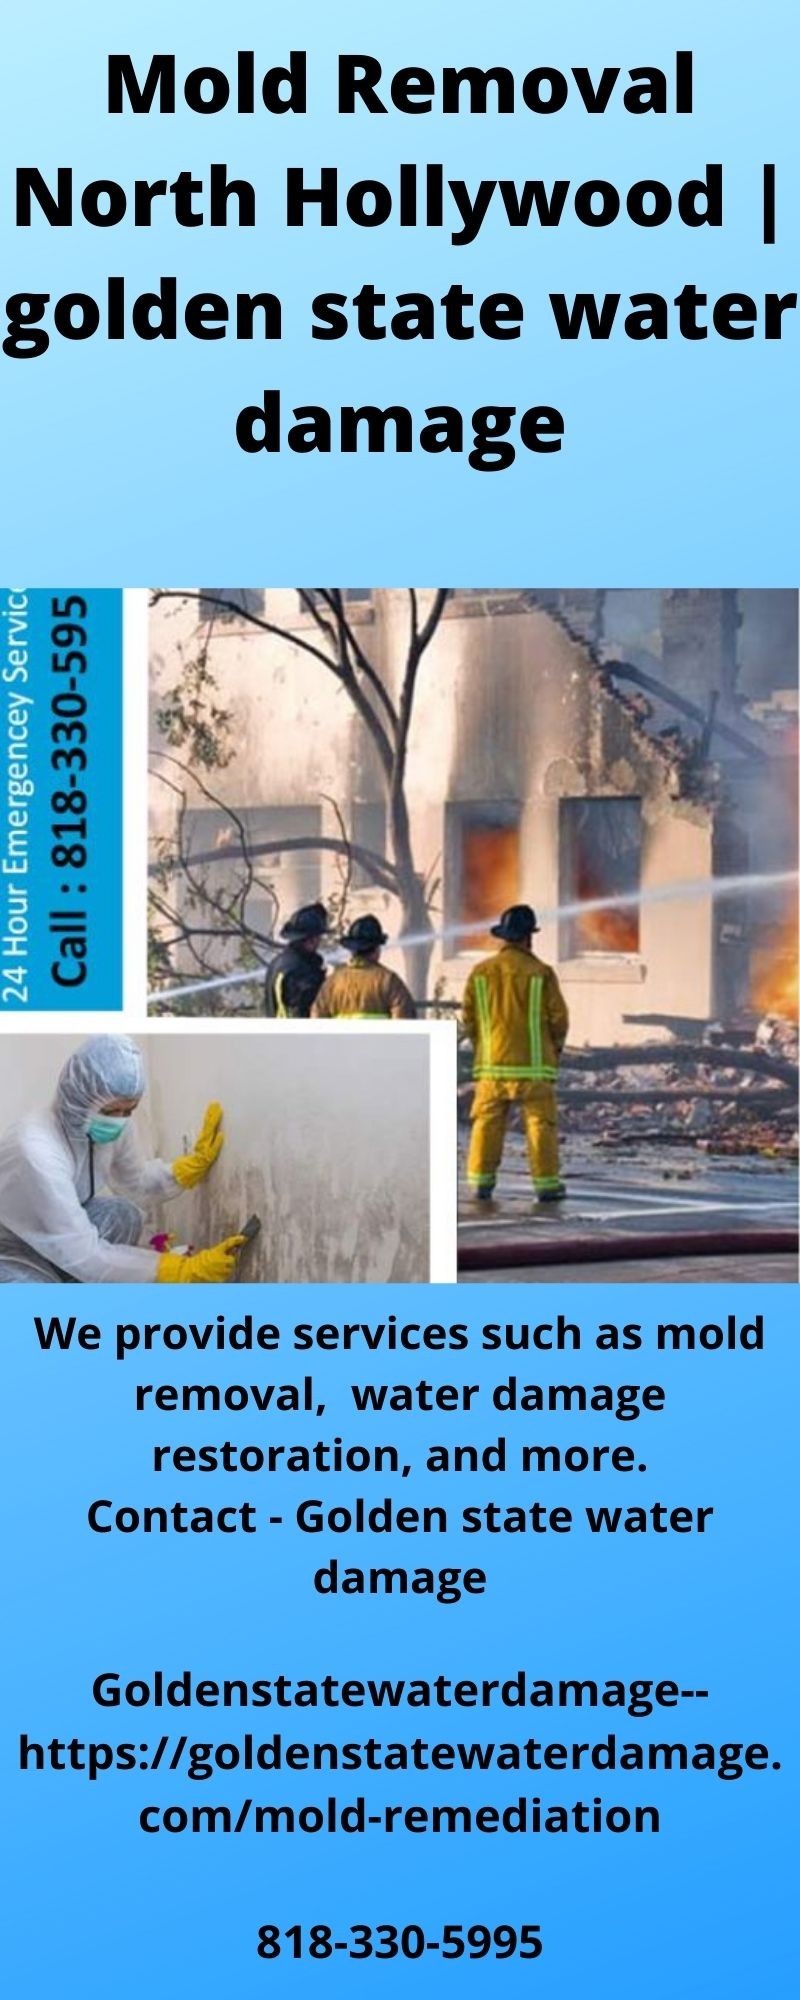 mold removal North Hollywood | golden state water damage